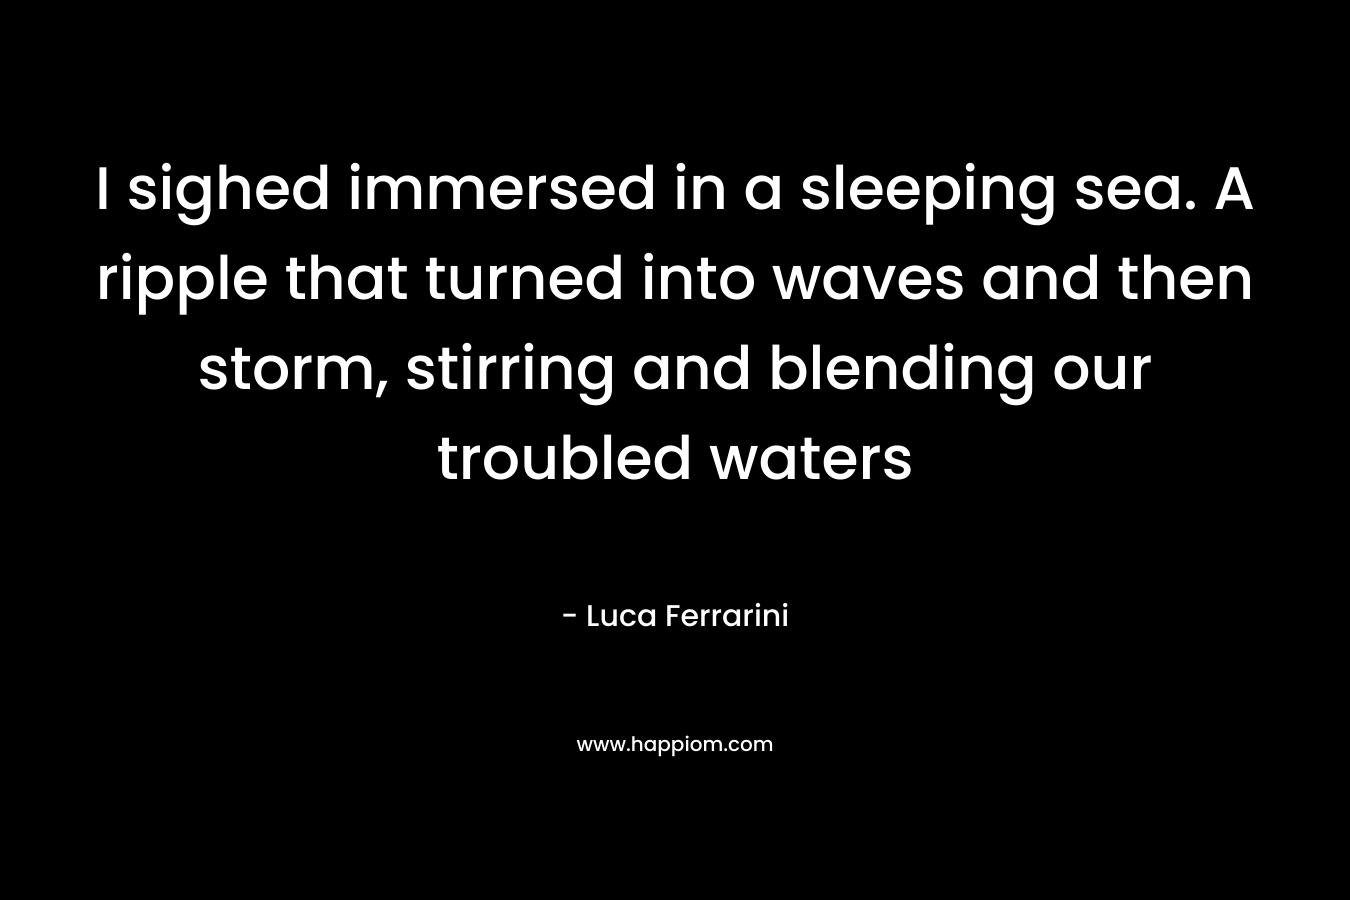 I sighed immersed in a sleeping sea. A ripple that turned into waves and then storm, stirring and blending our troubled waters